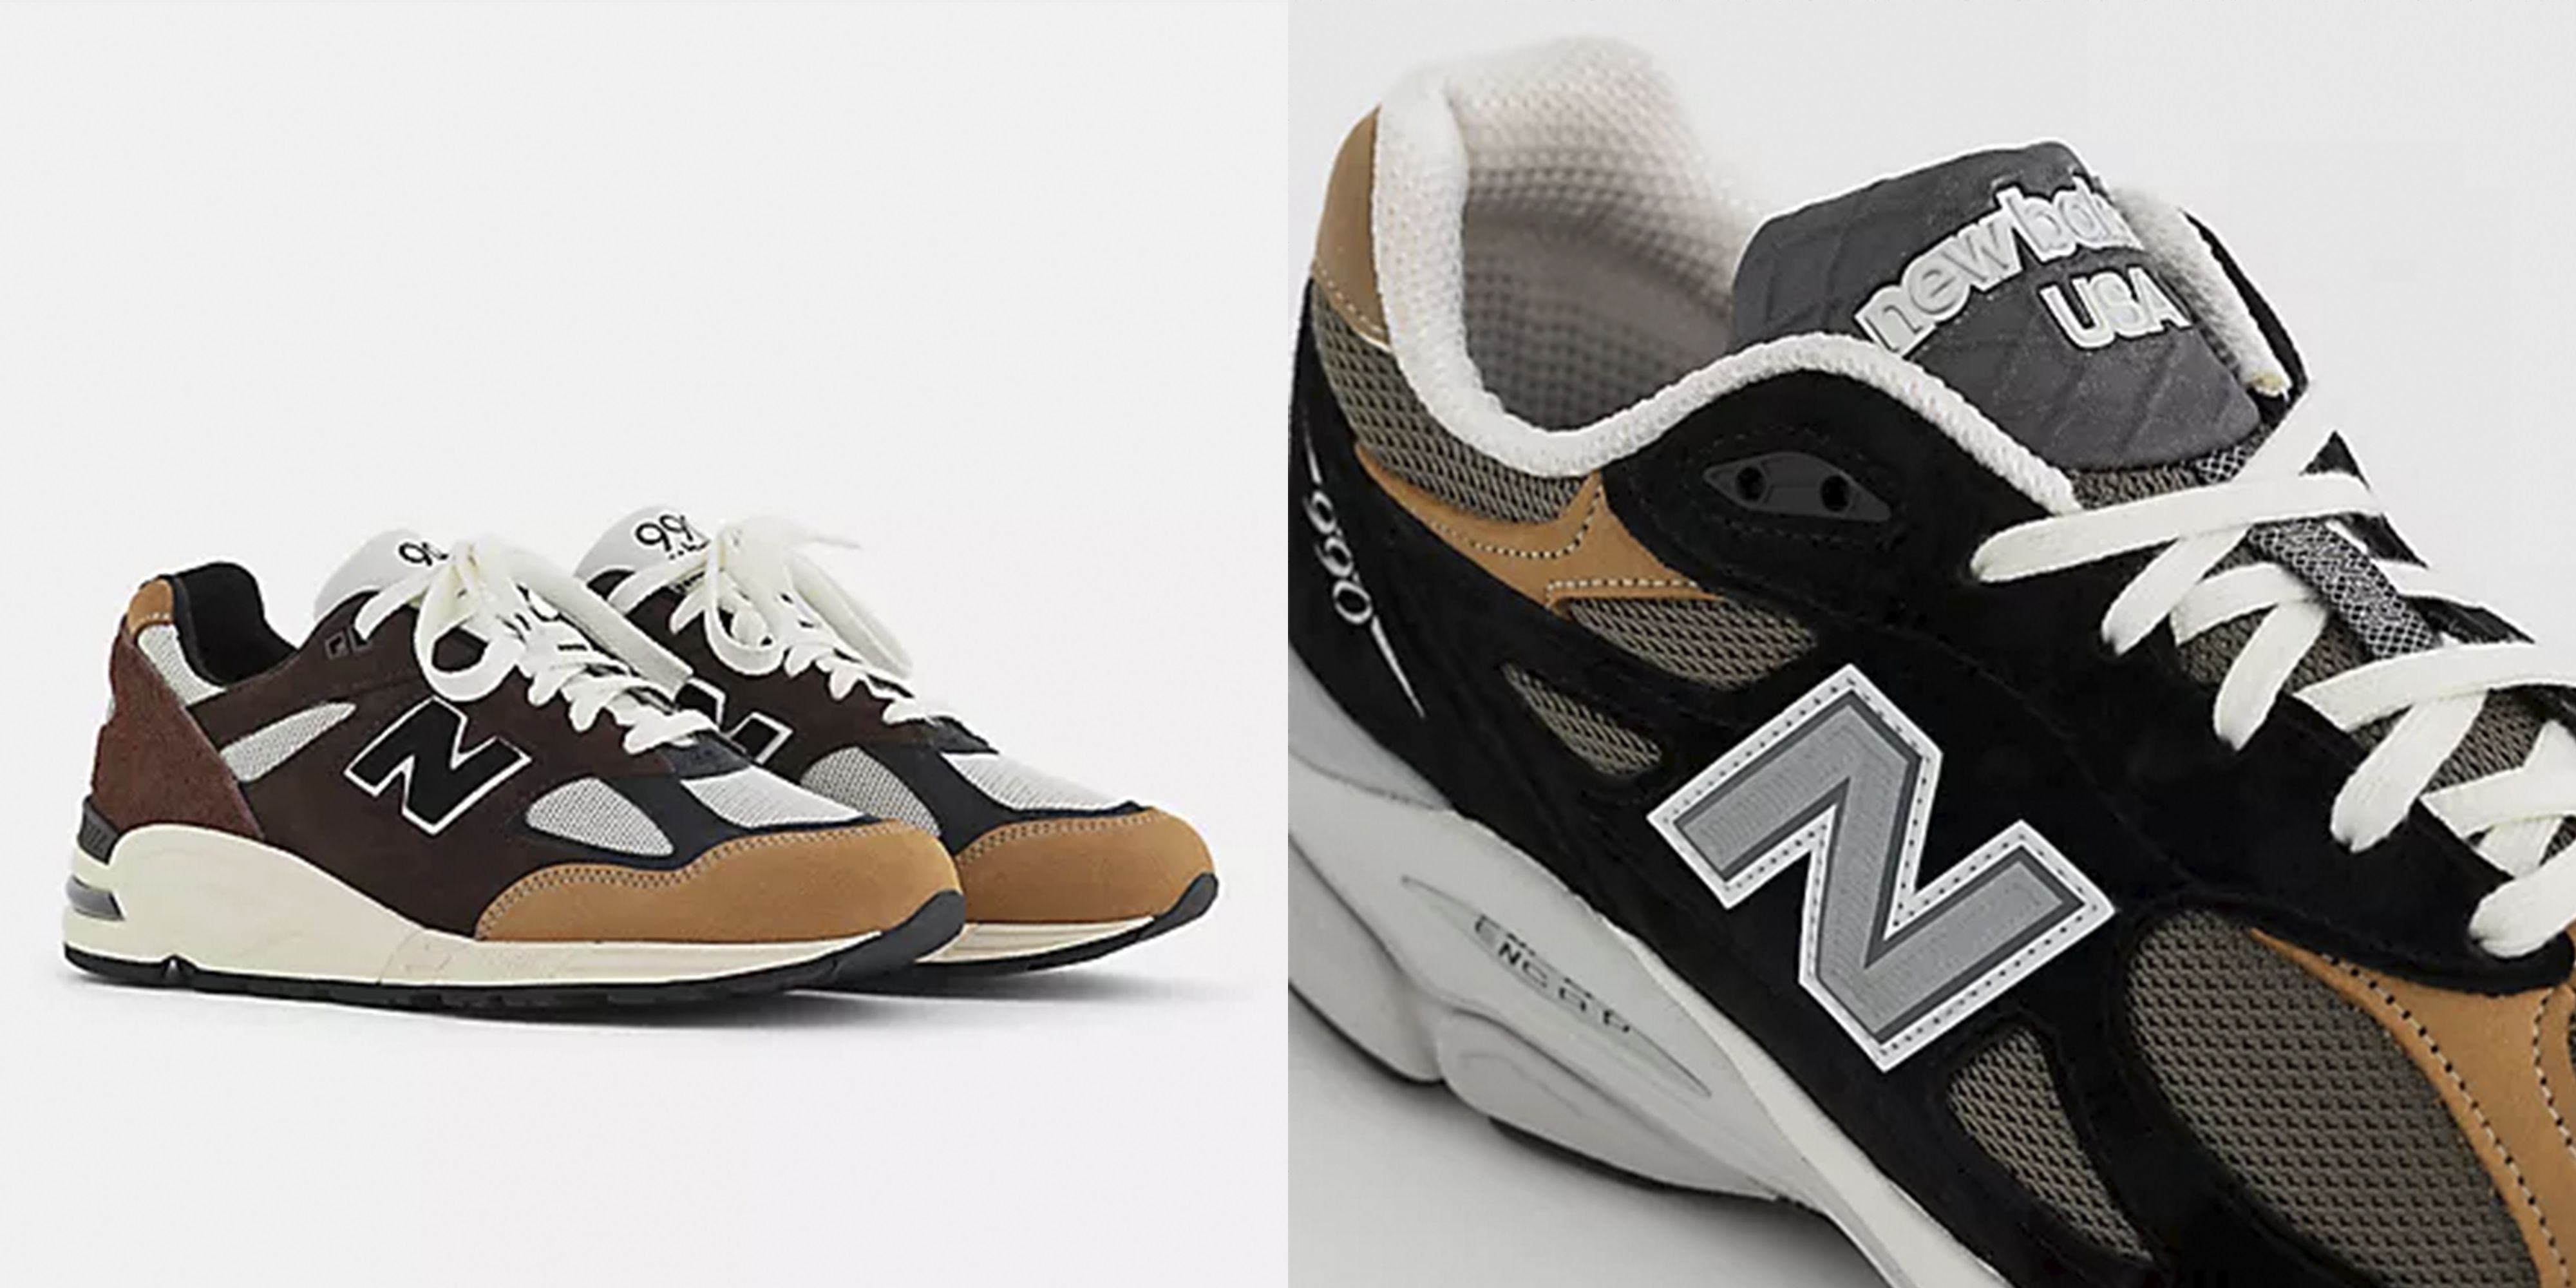 All the Teddy Santis New Balance Trainers Available Right Now